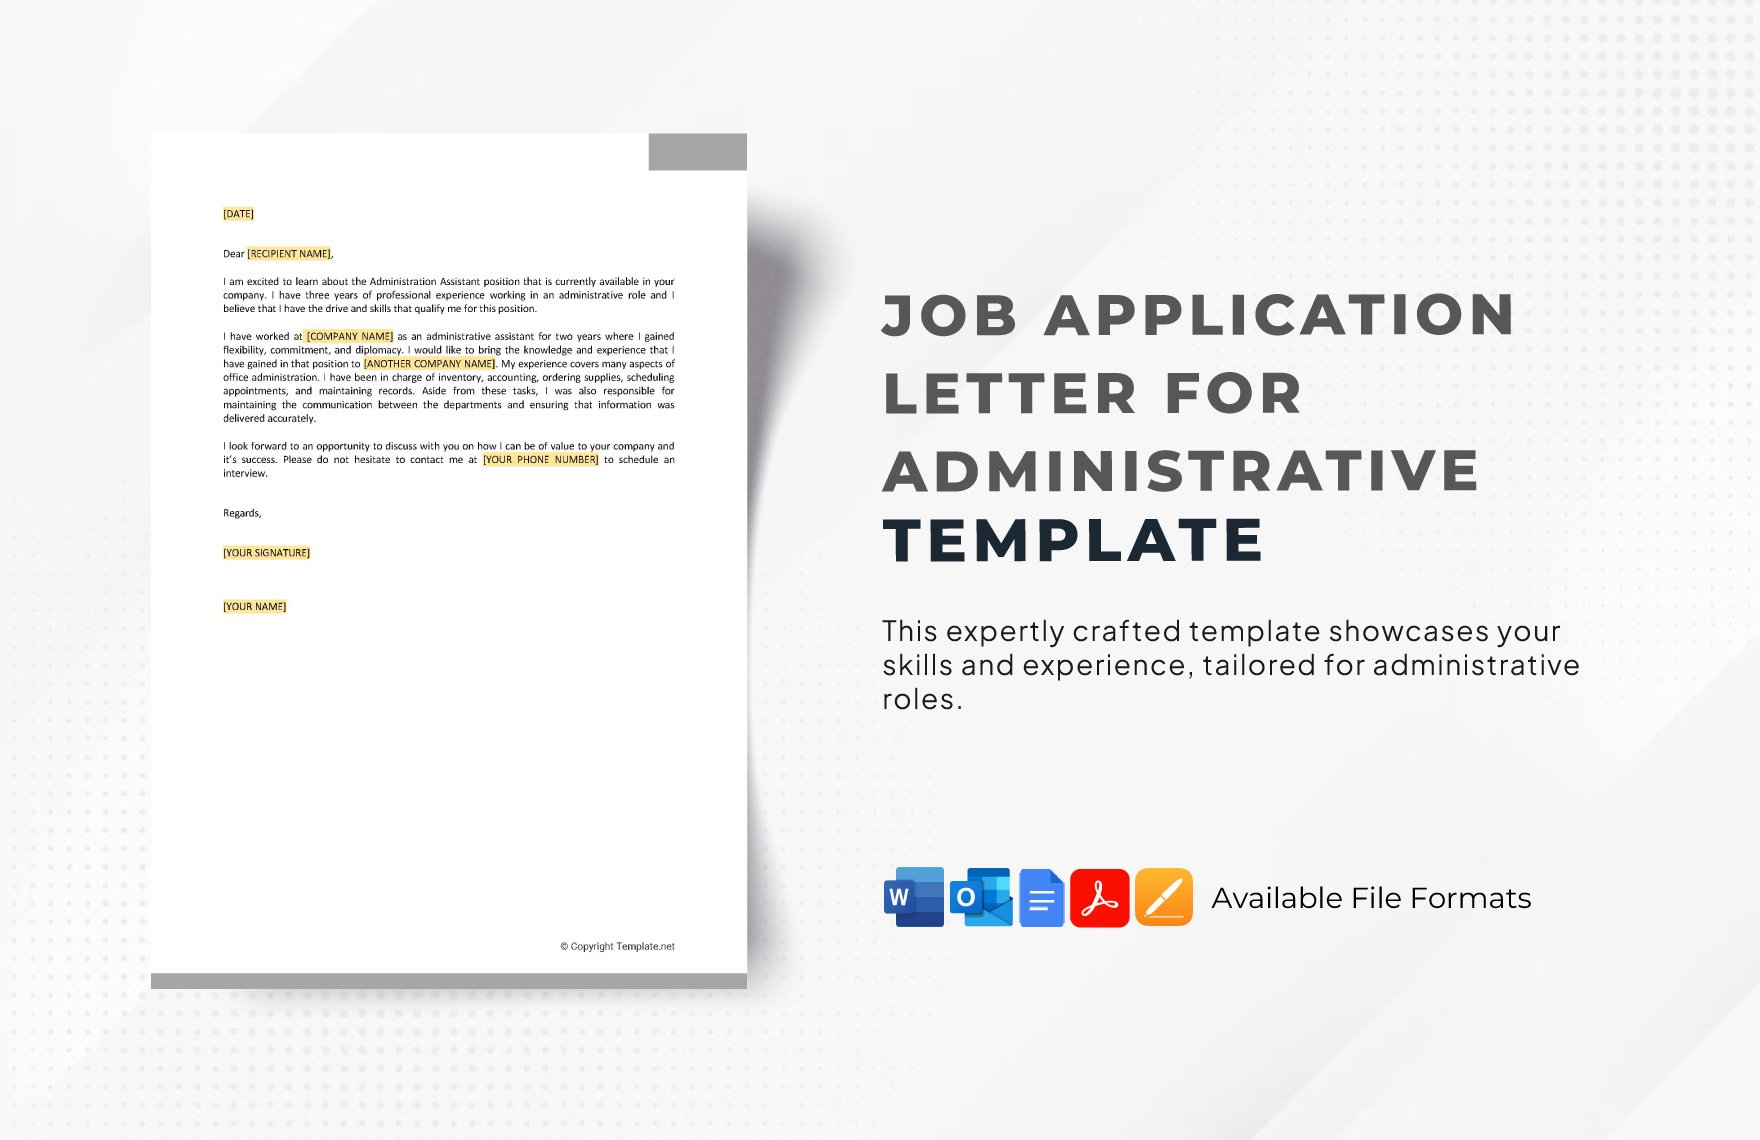 Job Application Letter Template in PDF